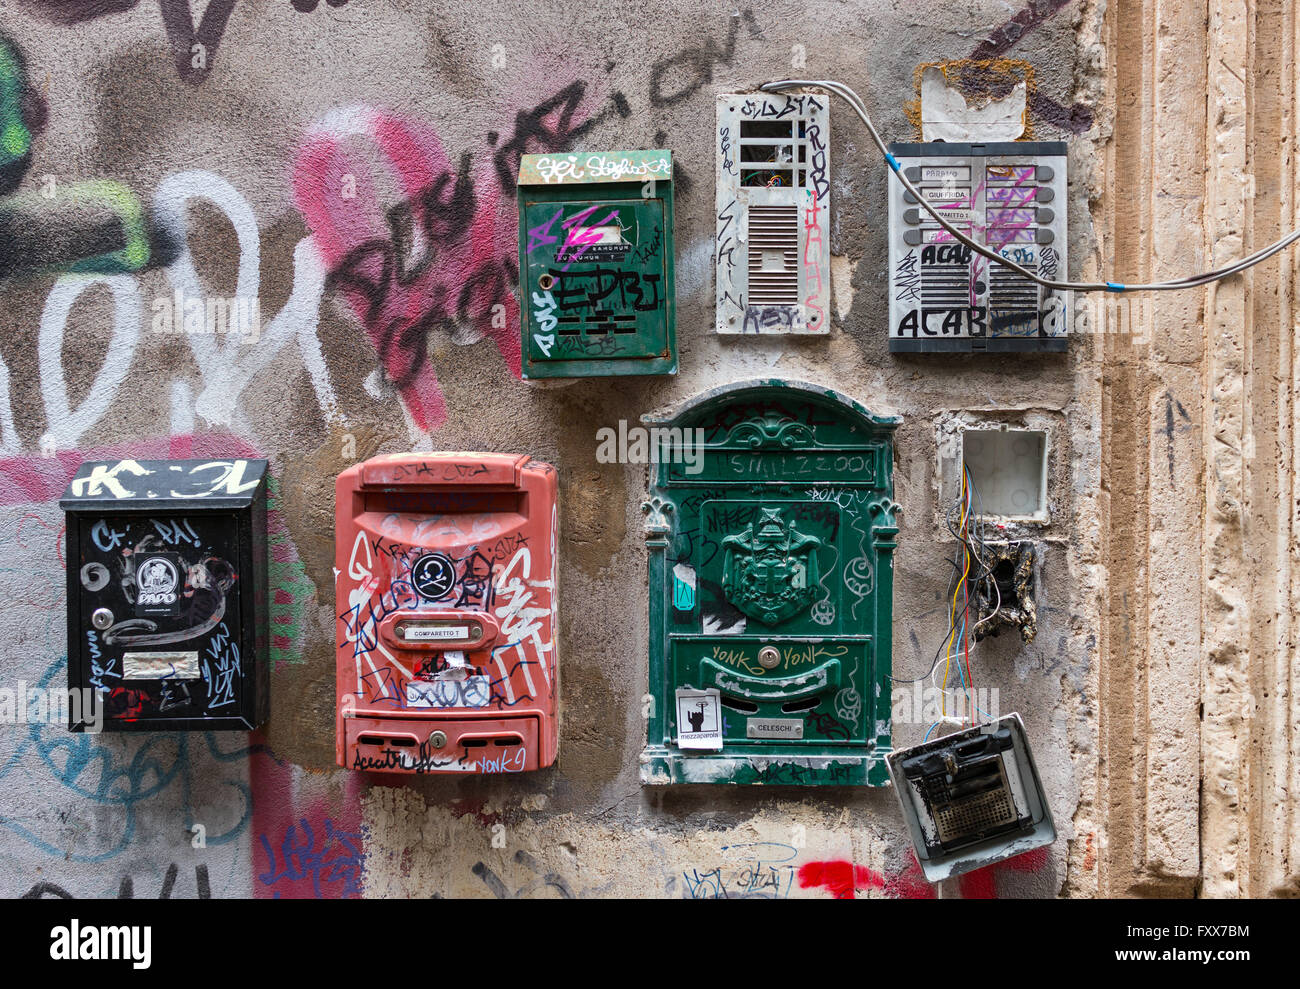 Old post and communications terminals in Catania Sicily with graffiti Stock Photo